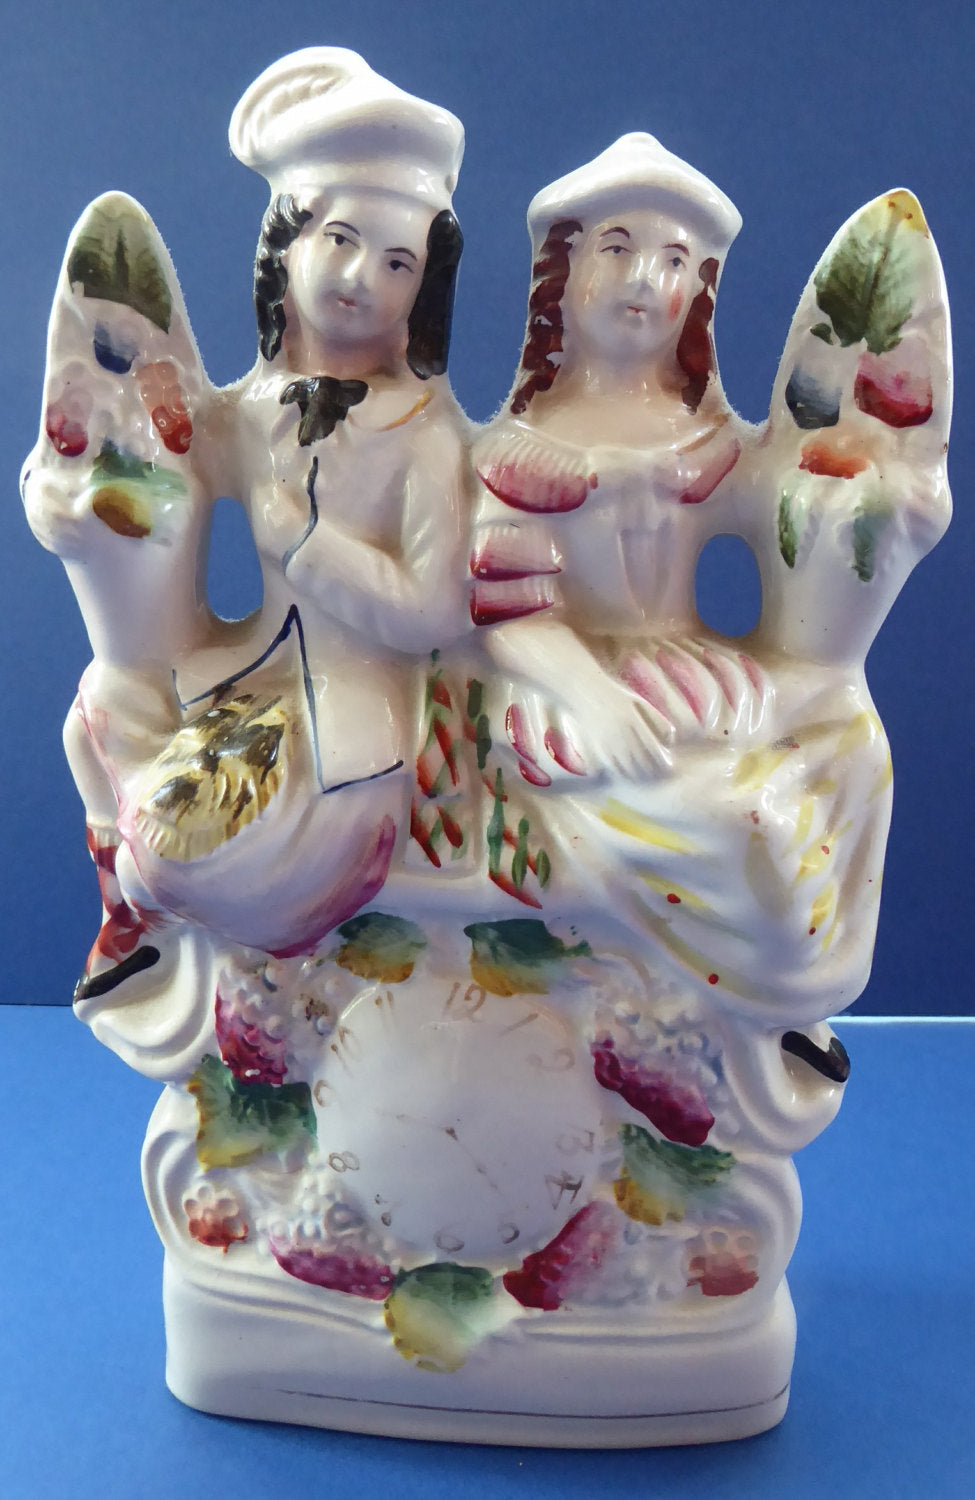 ANTIQUE Victorian Staffordshire Figurine. Poor Man's Clock. Two Highland Figures with Fruiting Vine